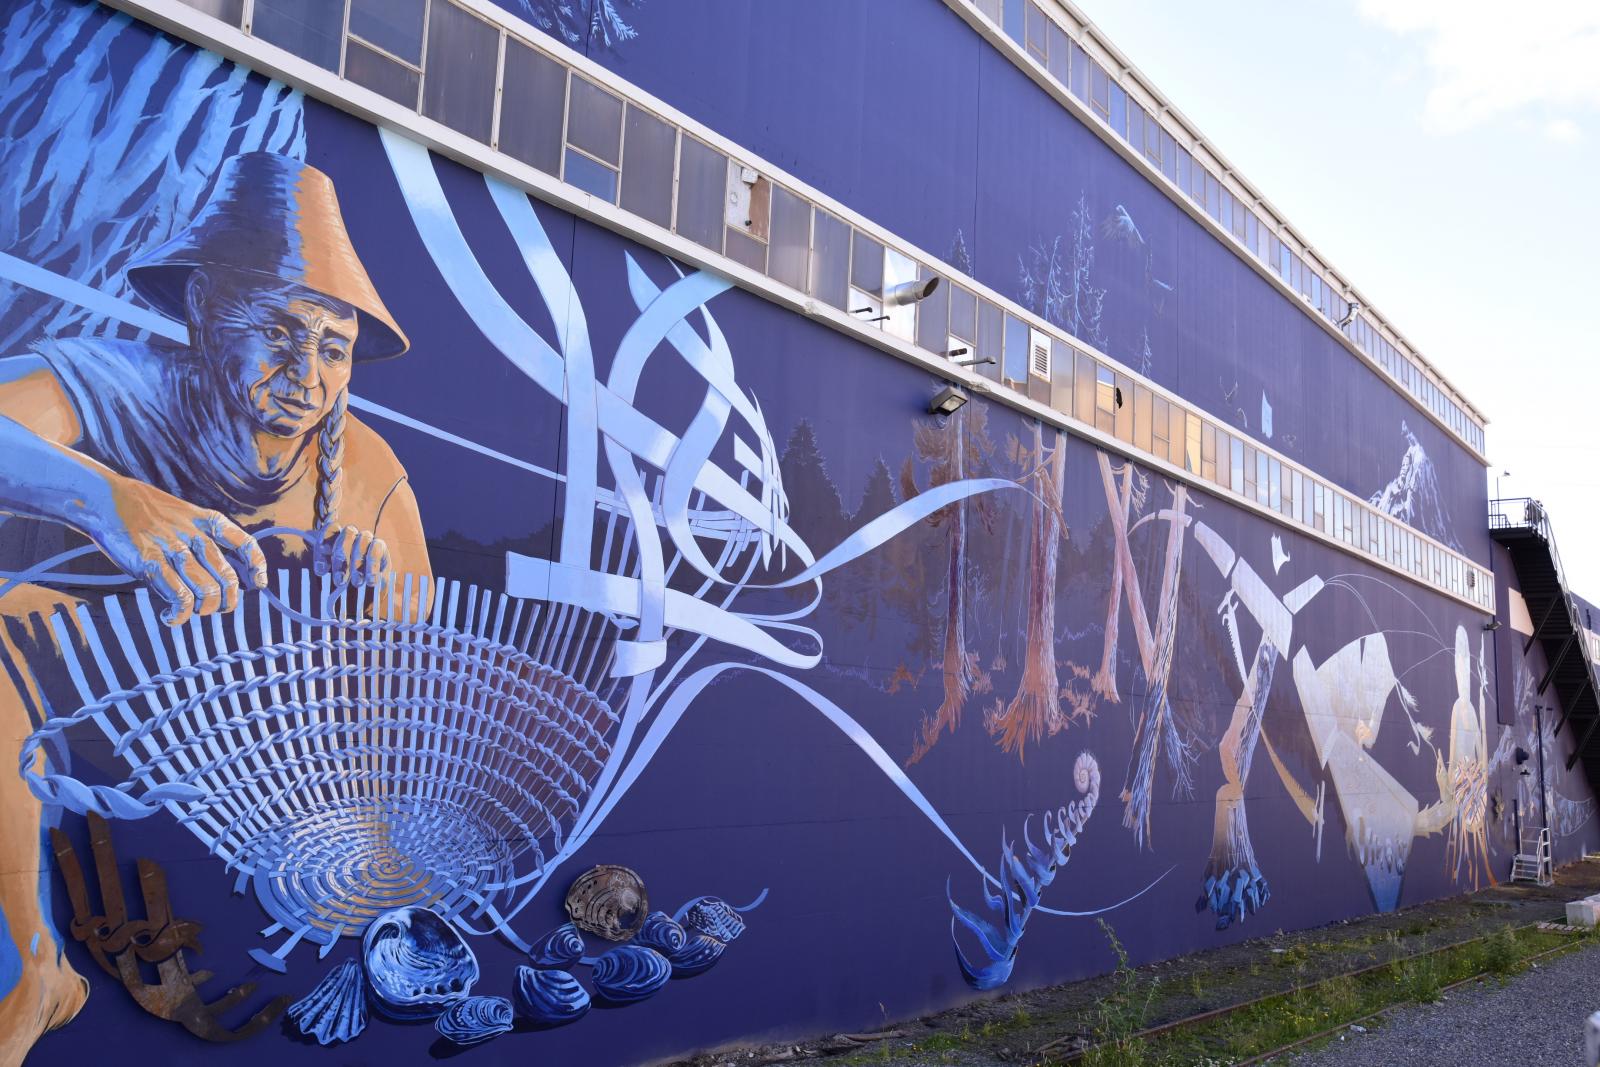 Image of Working Forward, Weaving Anew on the side of the 7 Seas Brewery building 